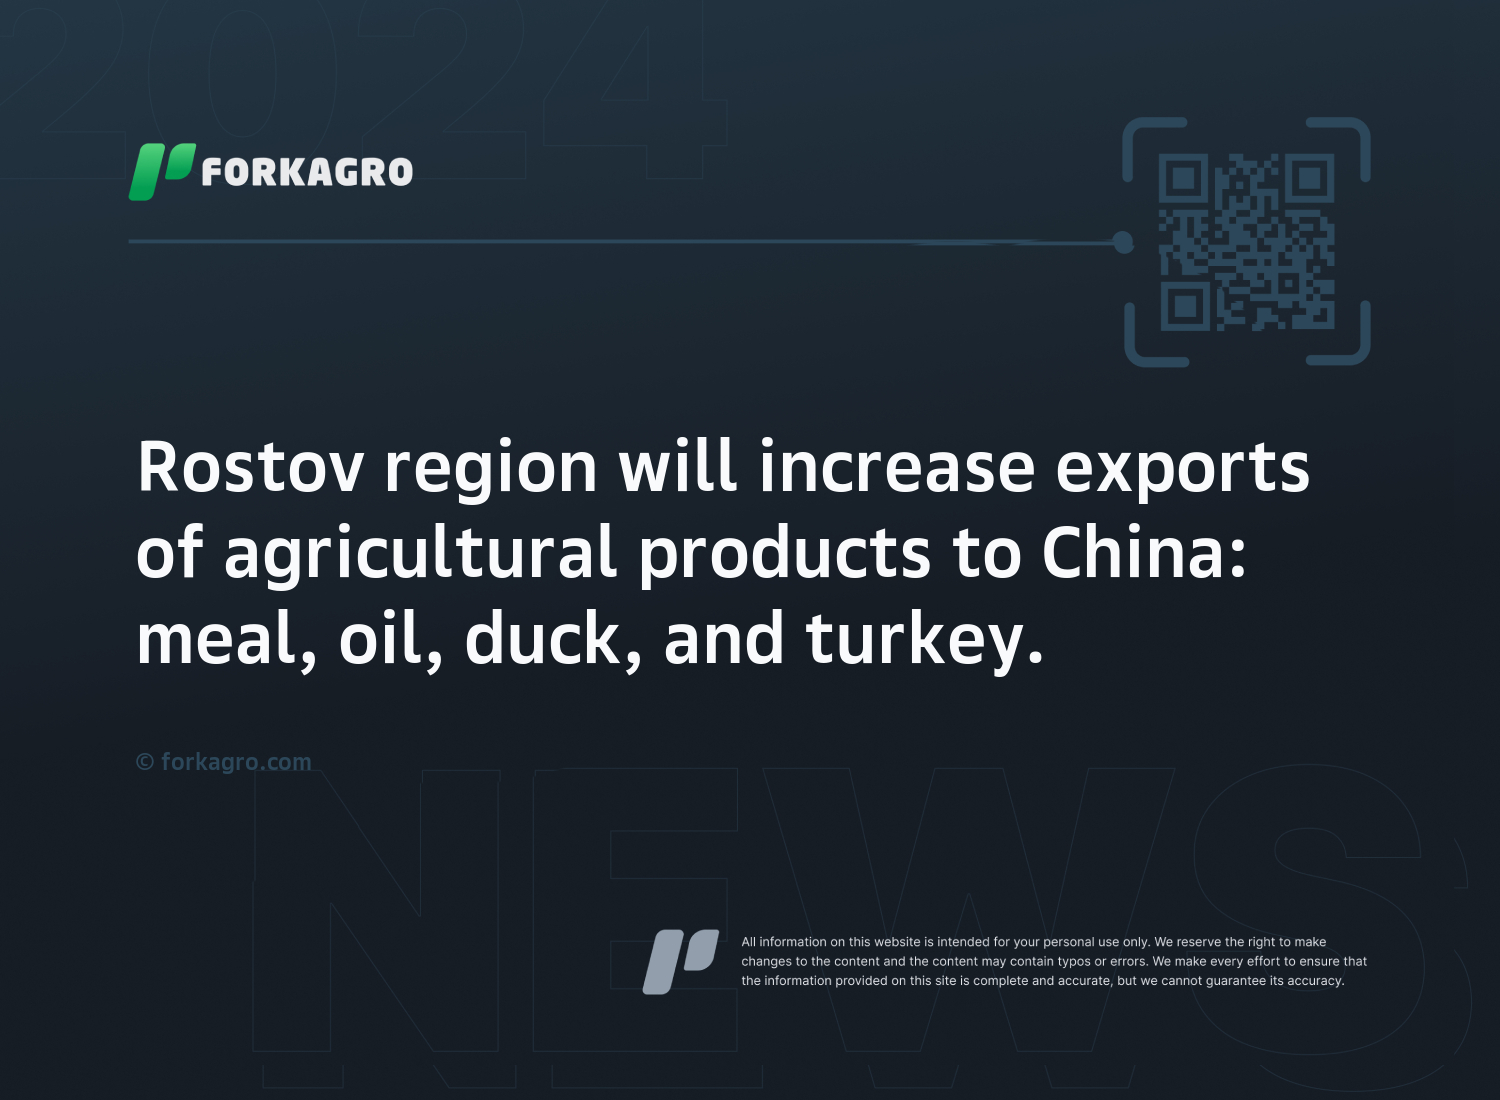 Rostov region will increase exports of agricultural products to China: meal, oil, duck, and turkey.